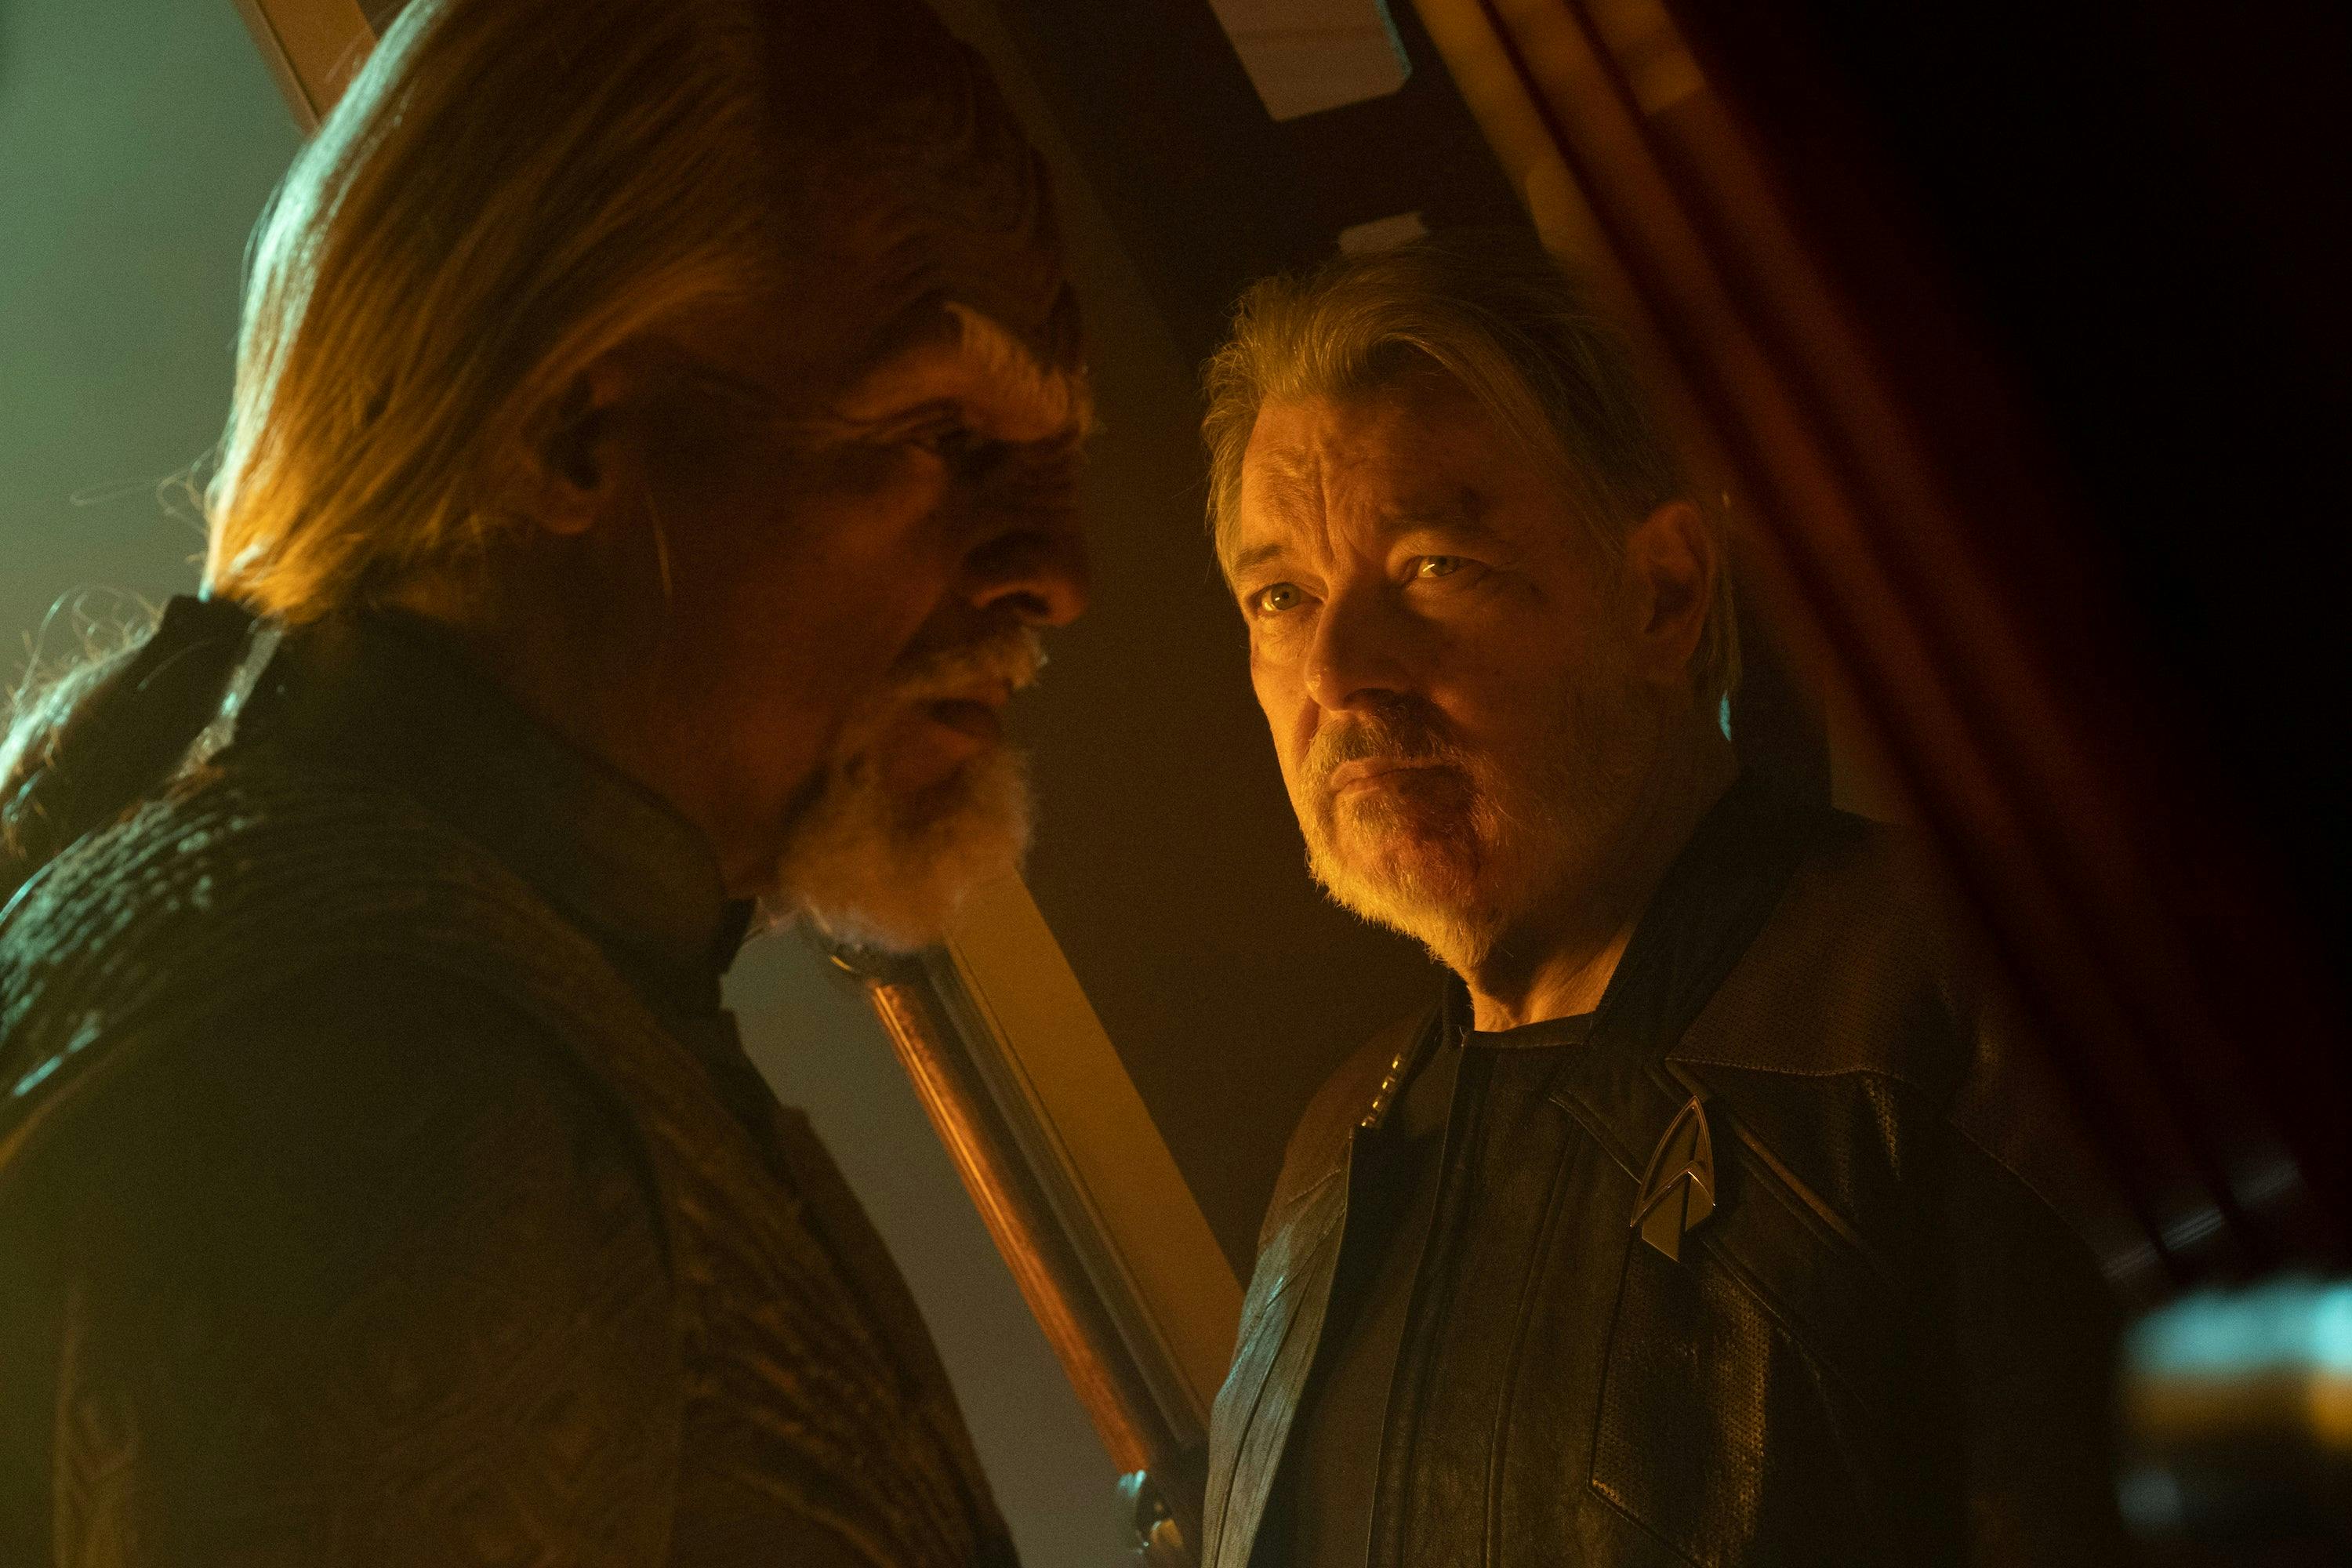 Worf and Riker pass each other as Will turns to look over at his friend on the Shrike